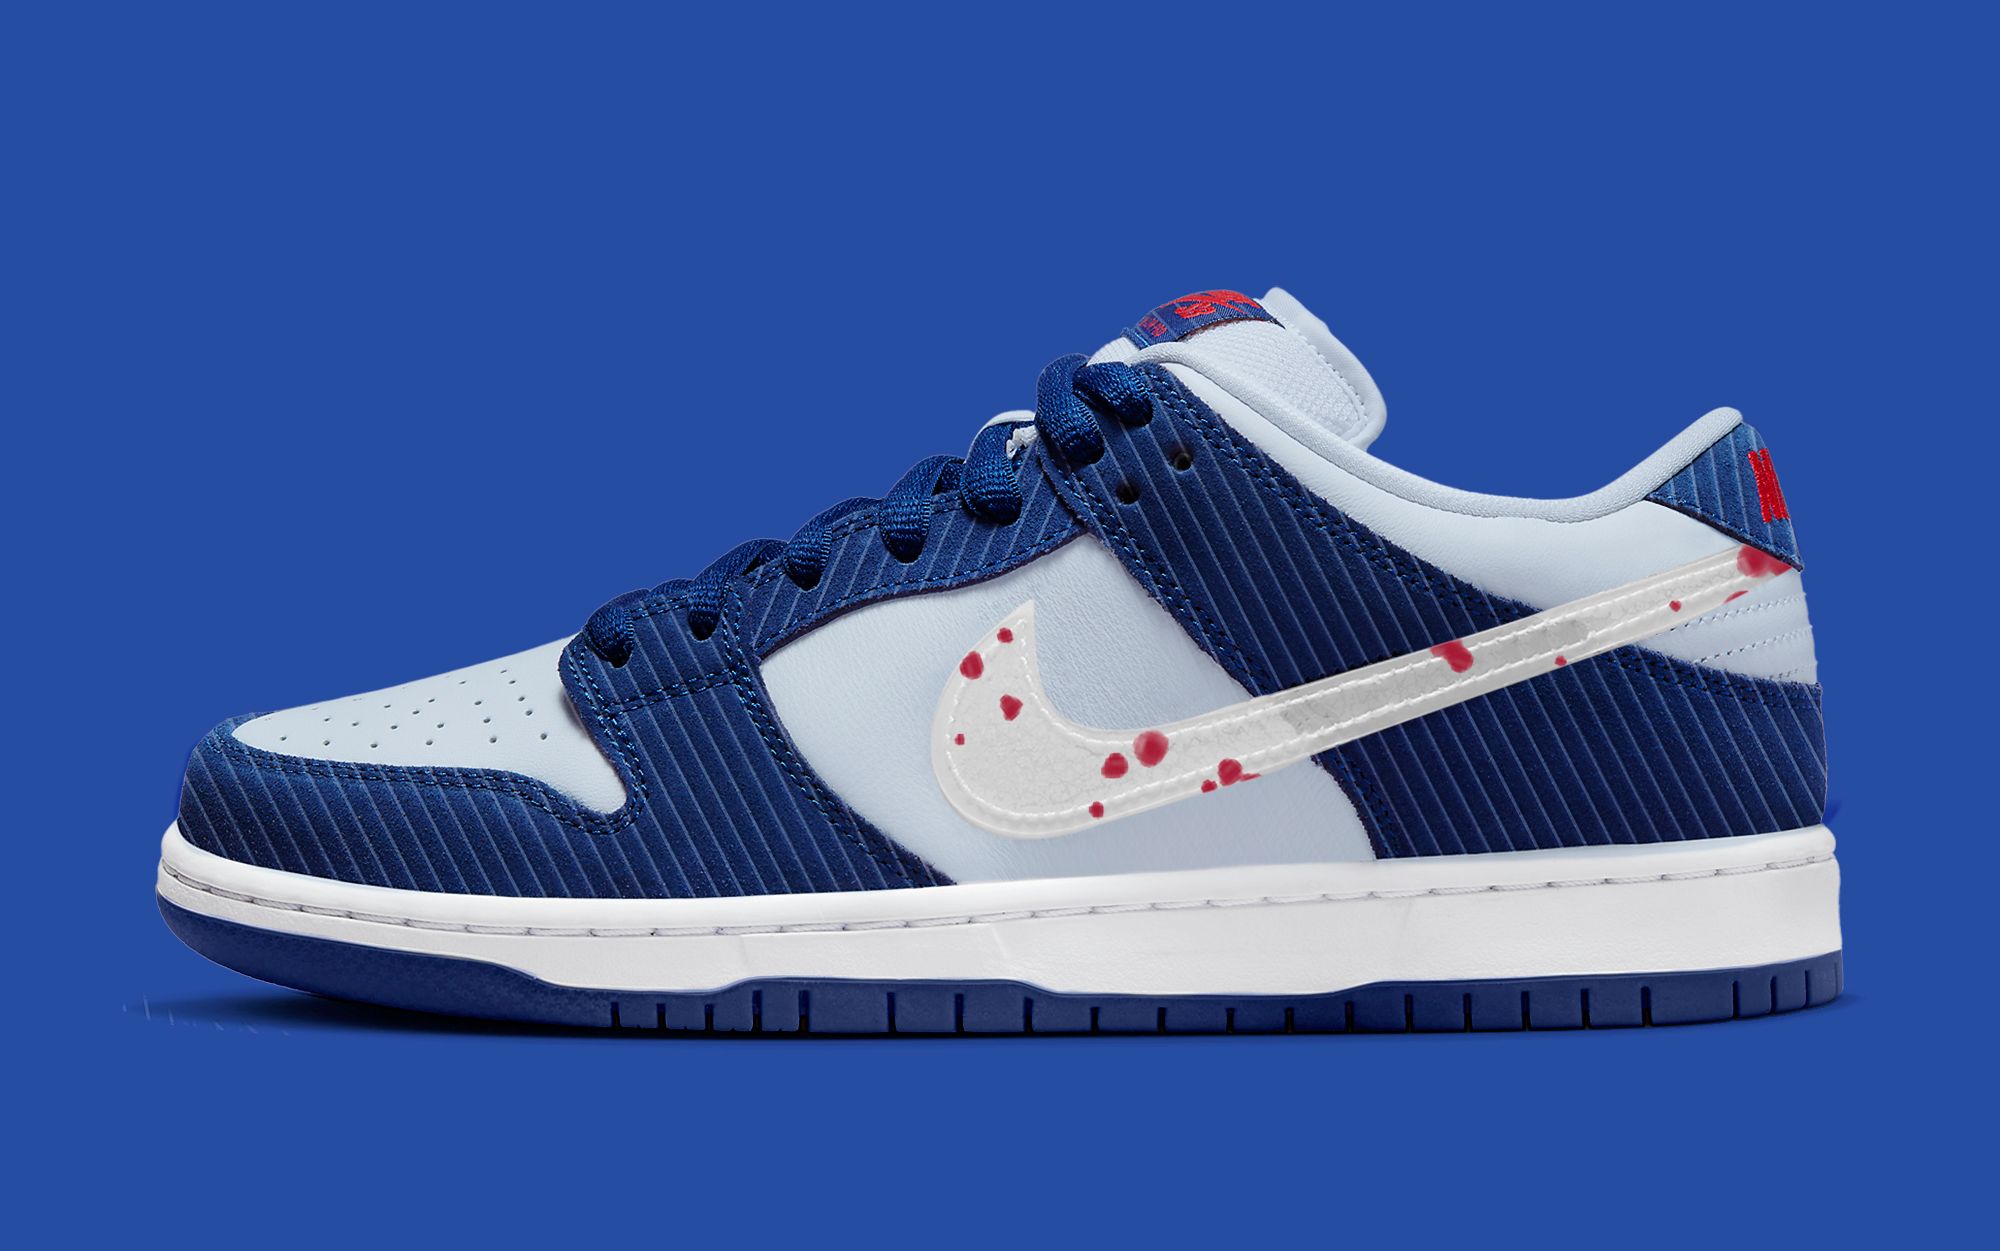 Eminem Nike SB dunks rumored to release next year sad part is I know  they're gonna be so expensive I won't be able to get them lmao : r/Eminem